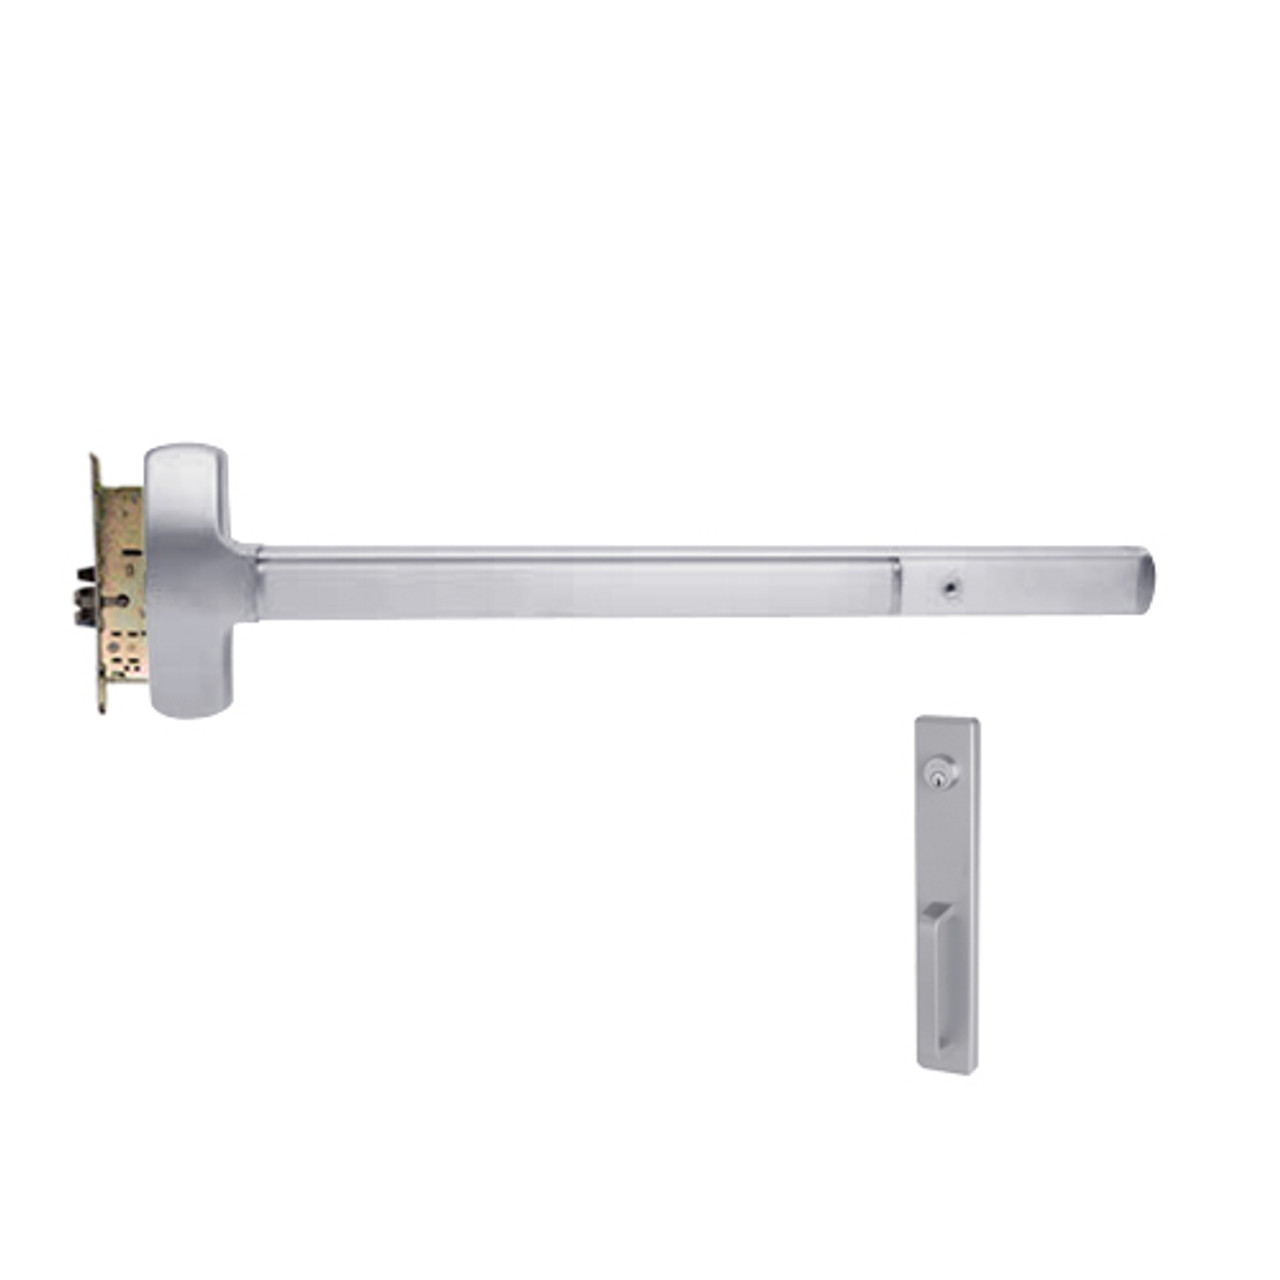 25-M-NL-US32-4-RHR Falcon Exit Device in Polished Stainless Steel